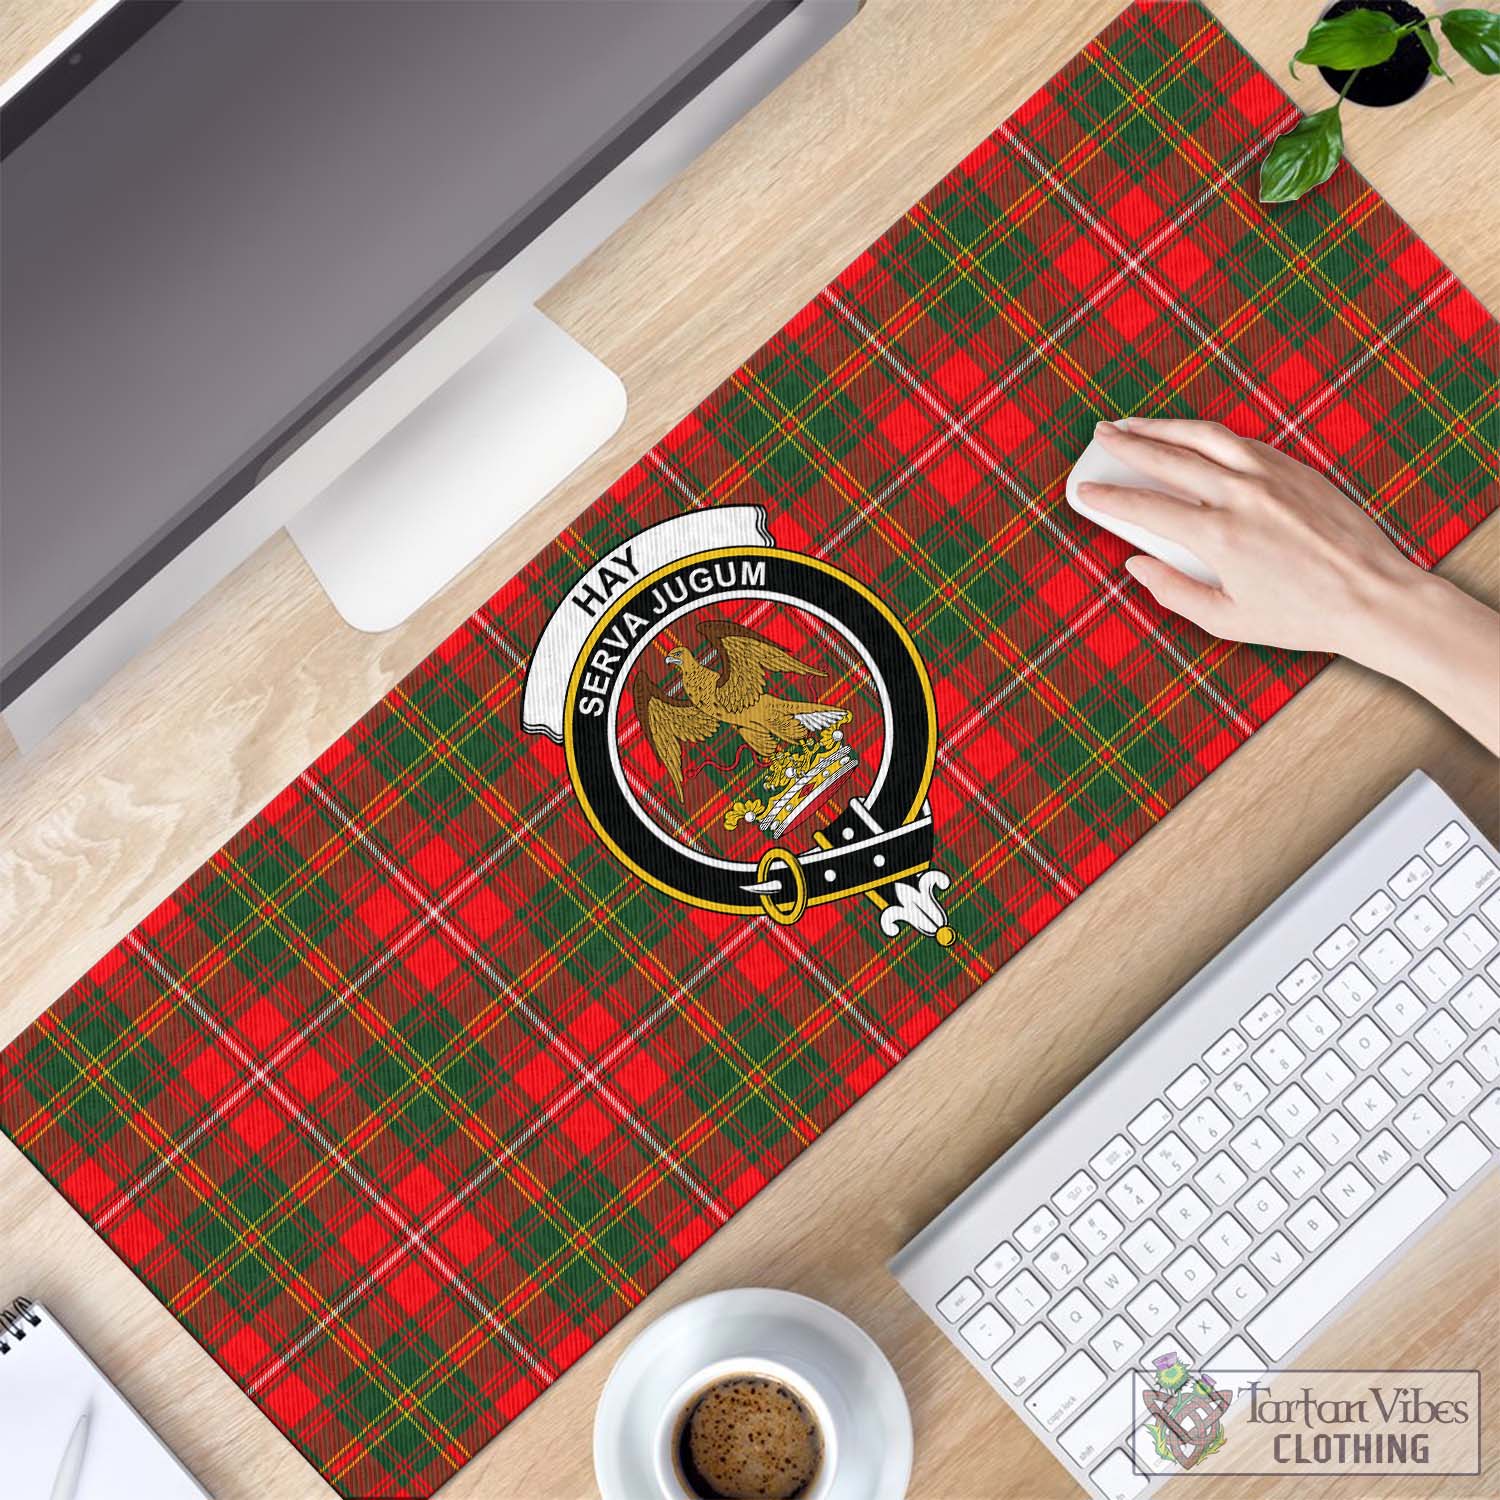 Tartan Vibes Clothing Hay Modern Tartan Mouse Pad with Family Crest